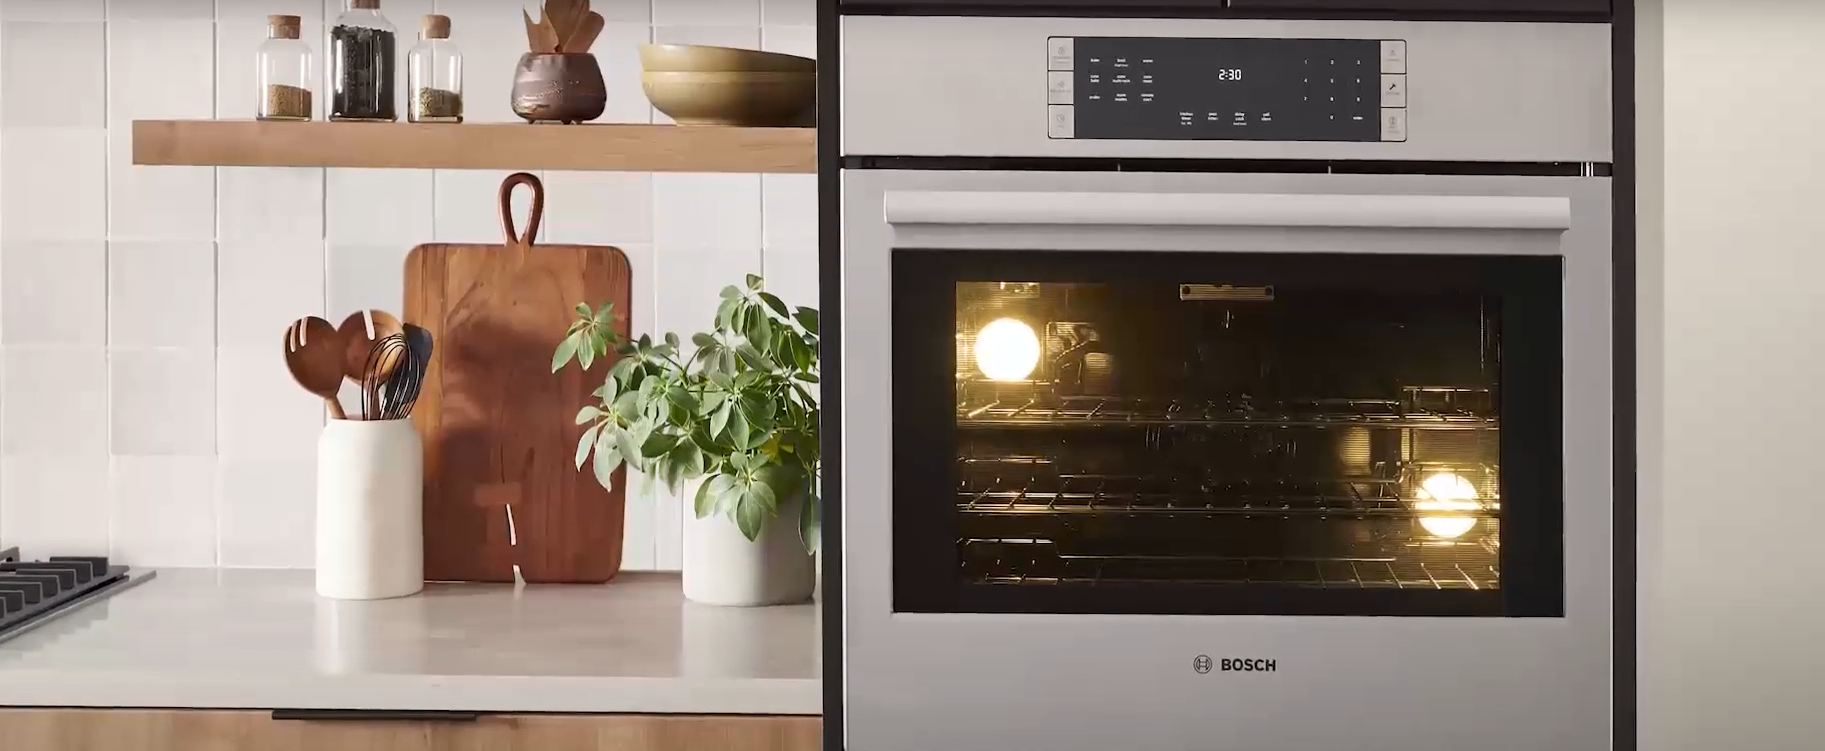 Bosch Oven in display